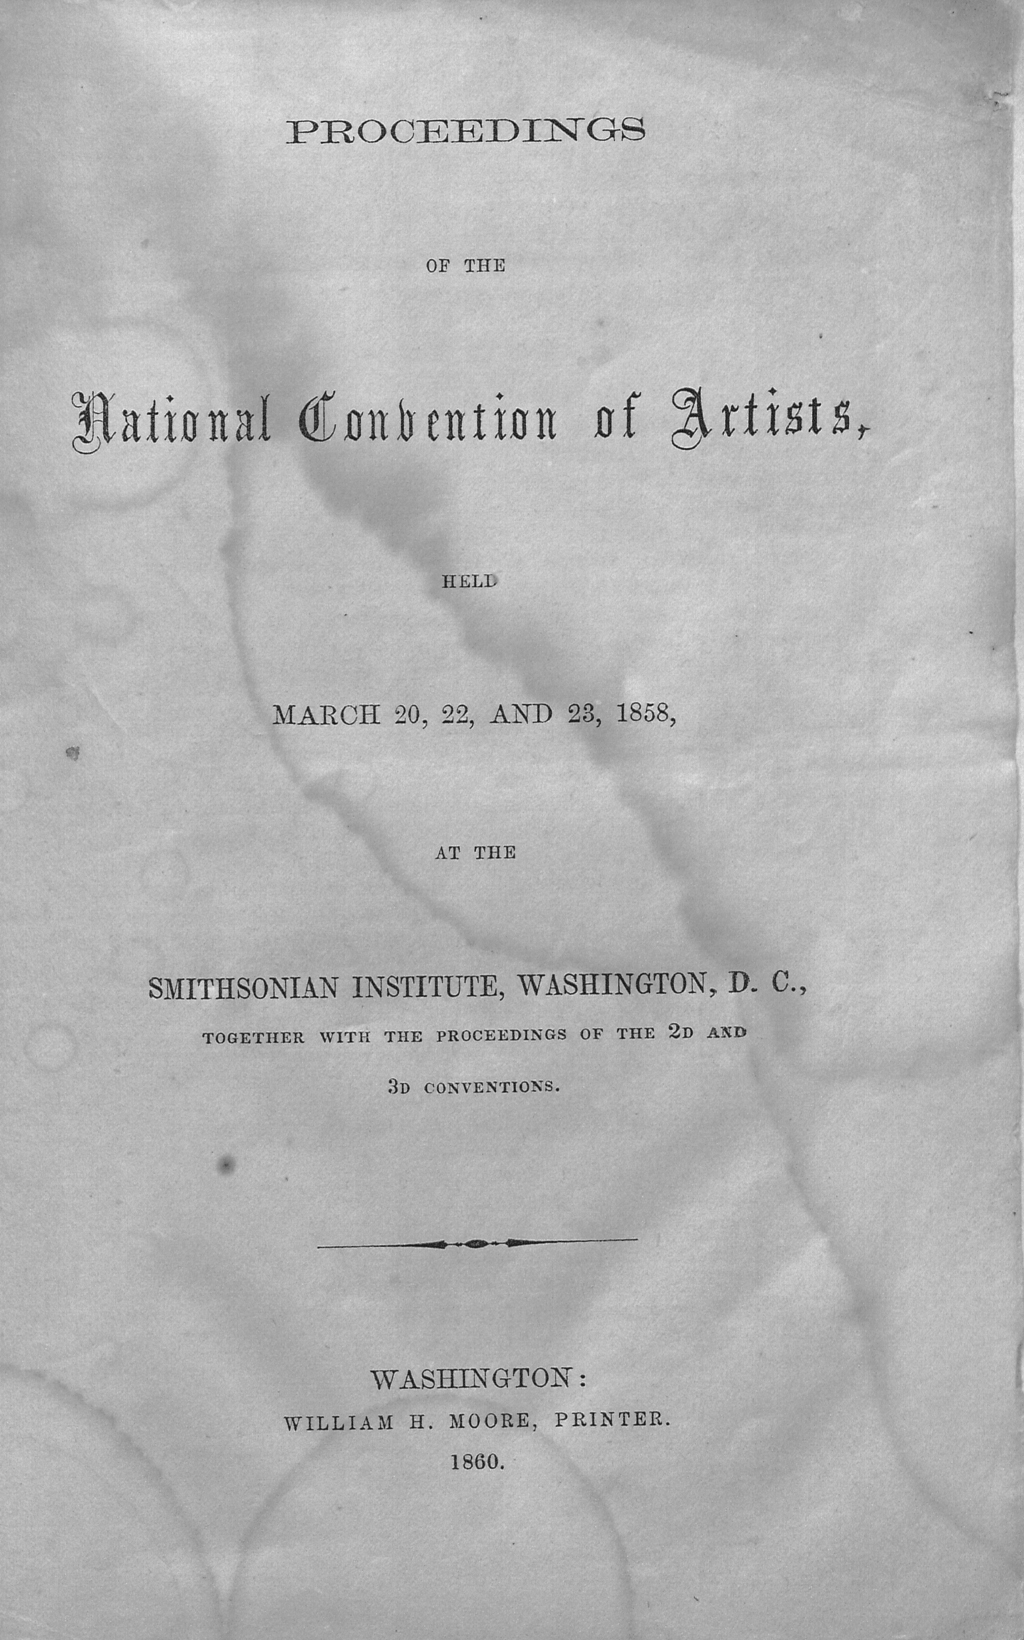 
            Proceedings of the National Convention of ArtistsWashington: William H. Moore, 1860
        